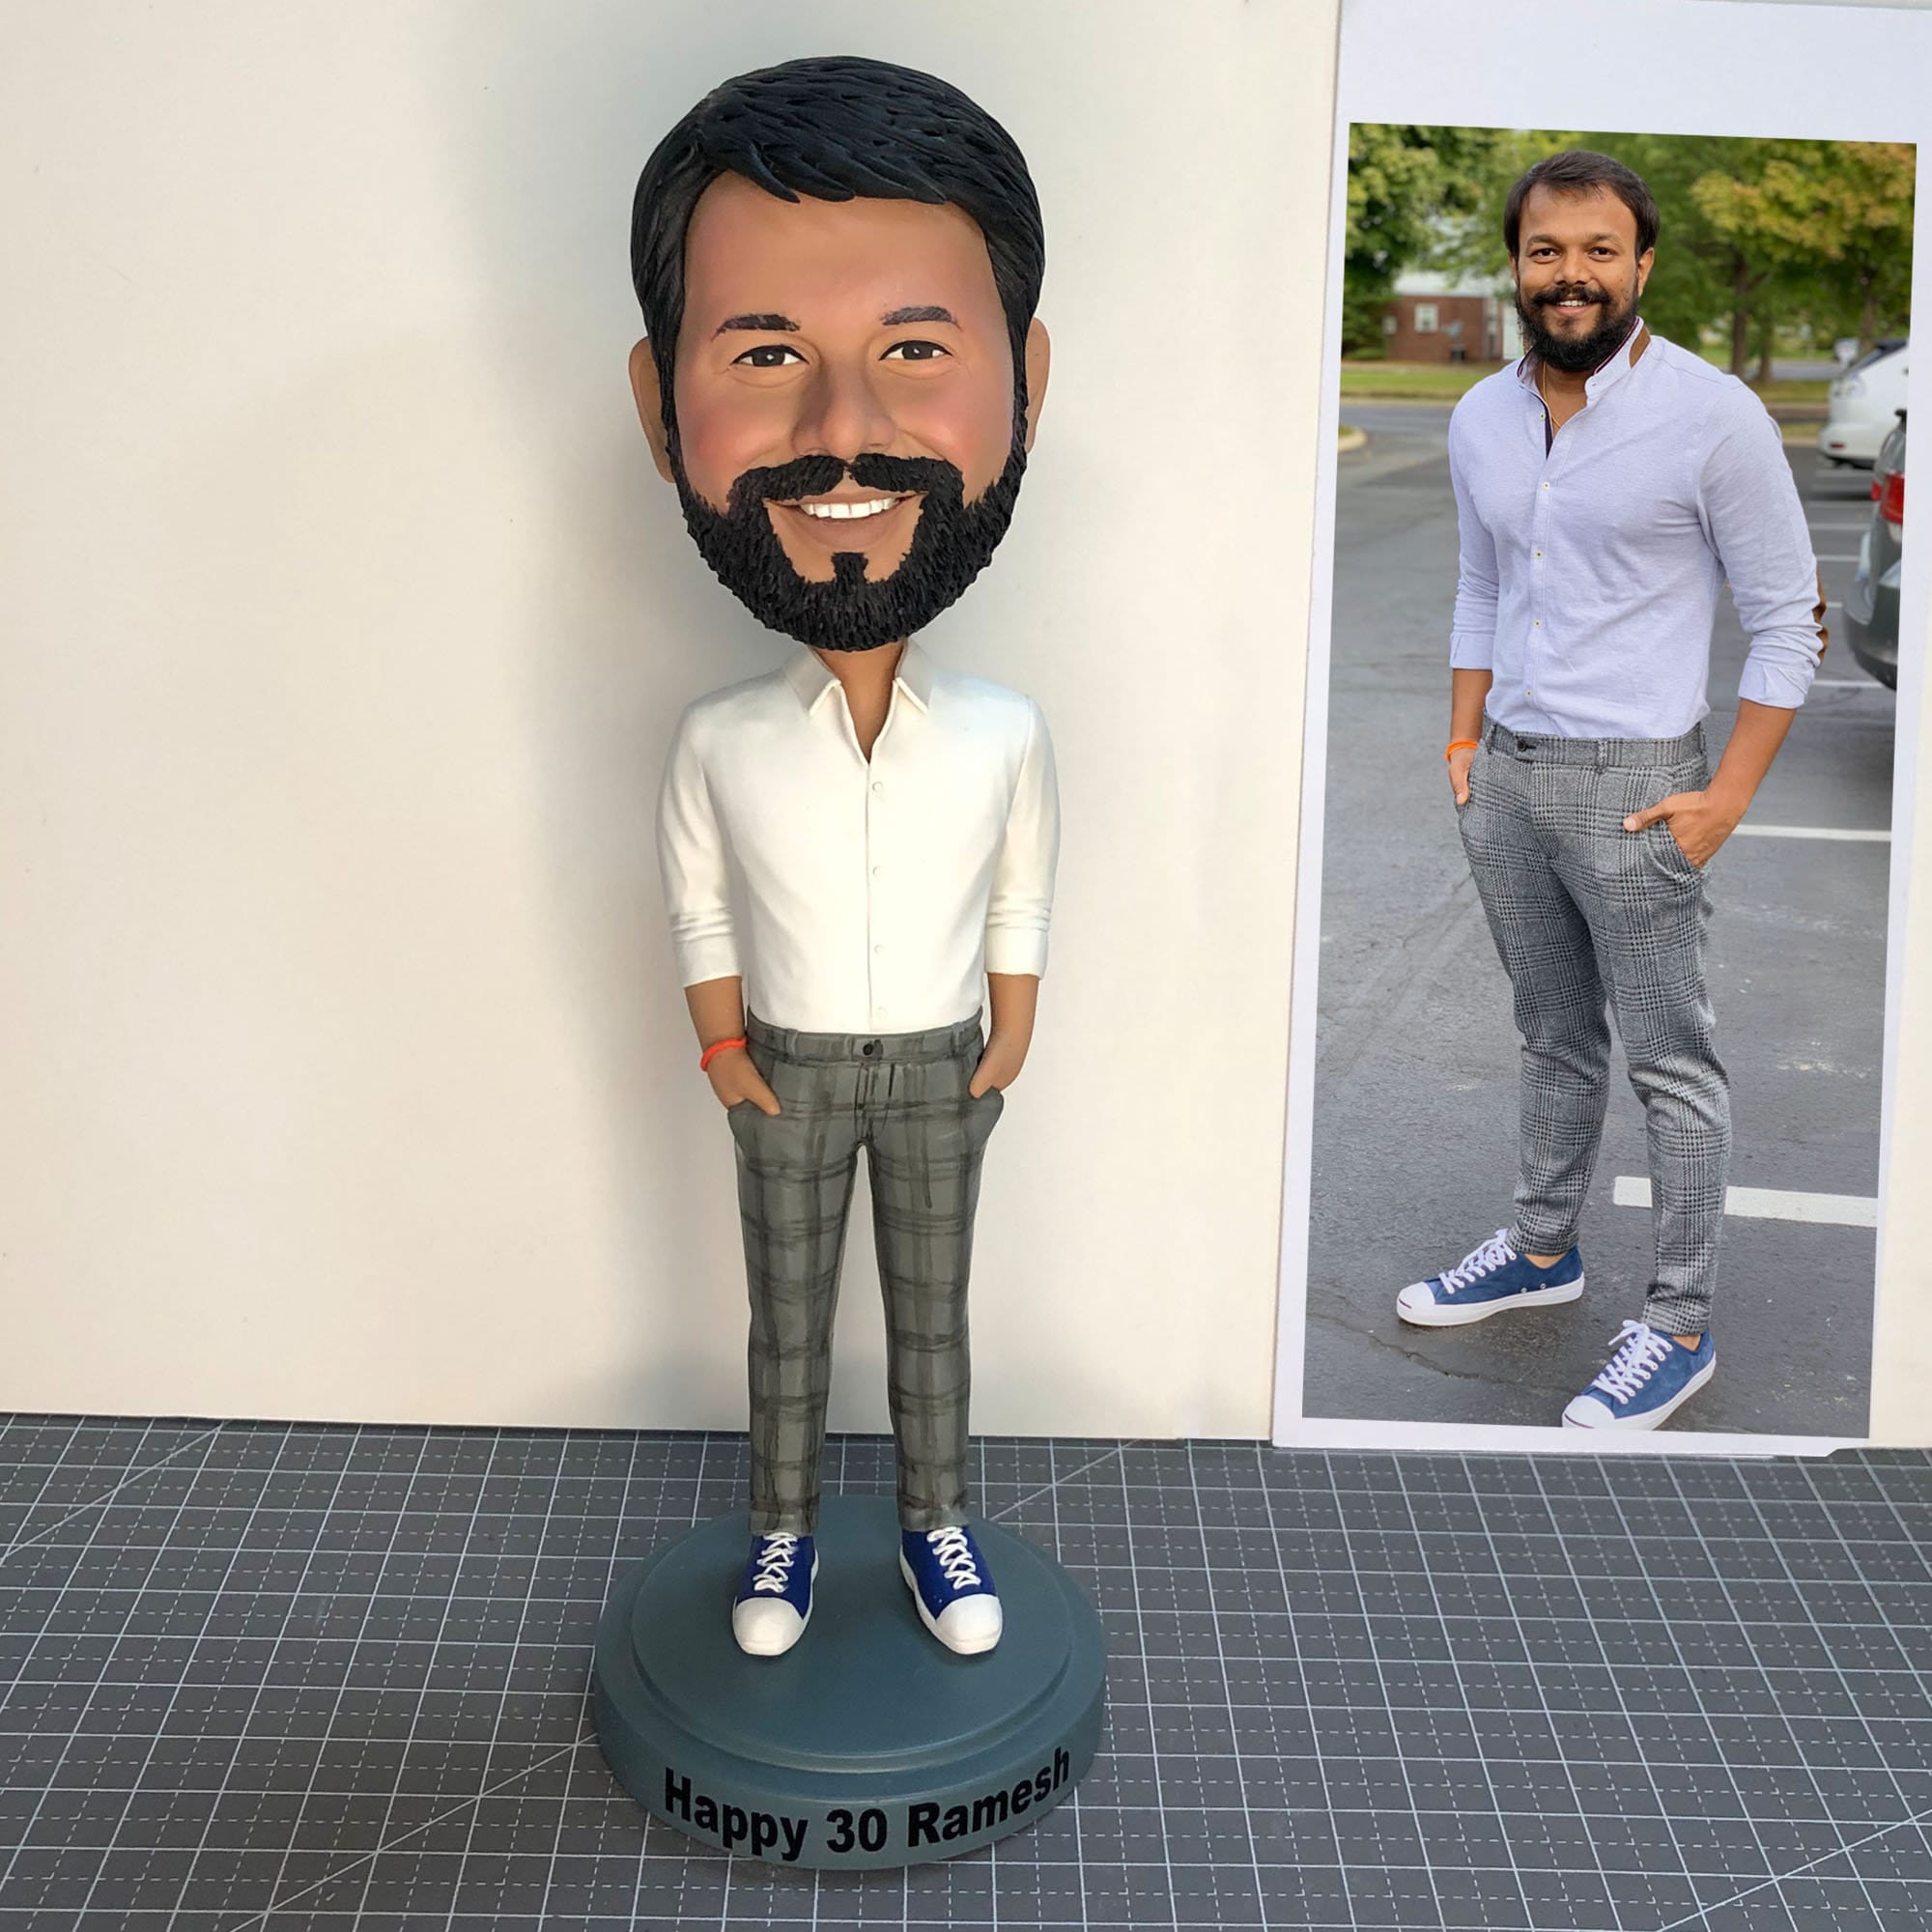 Custom Man Bobbleheads Personalized Romantic Gifts for Him - Etsy